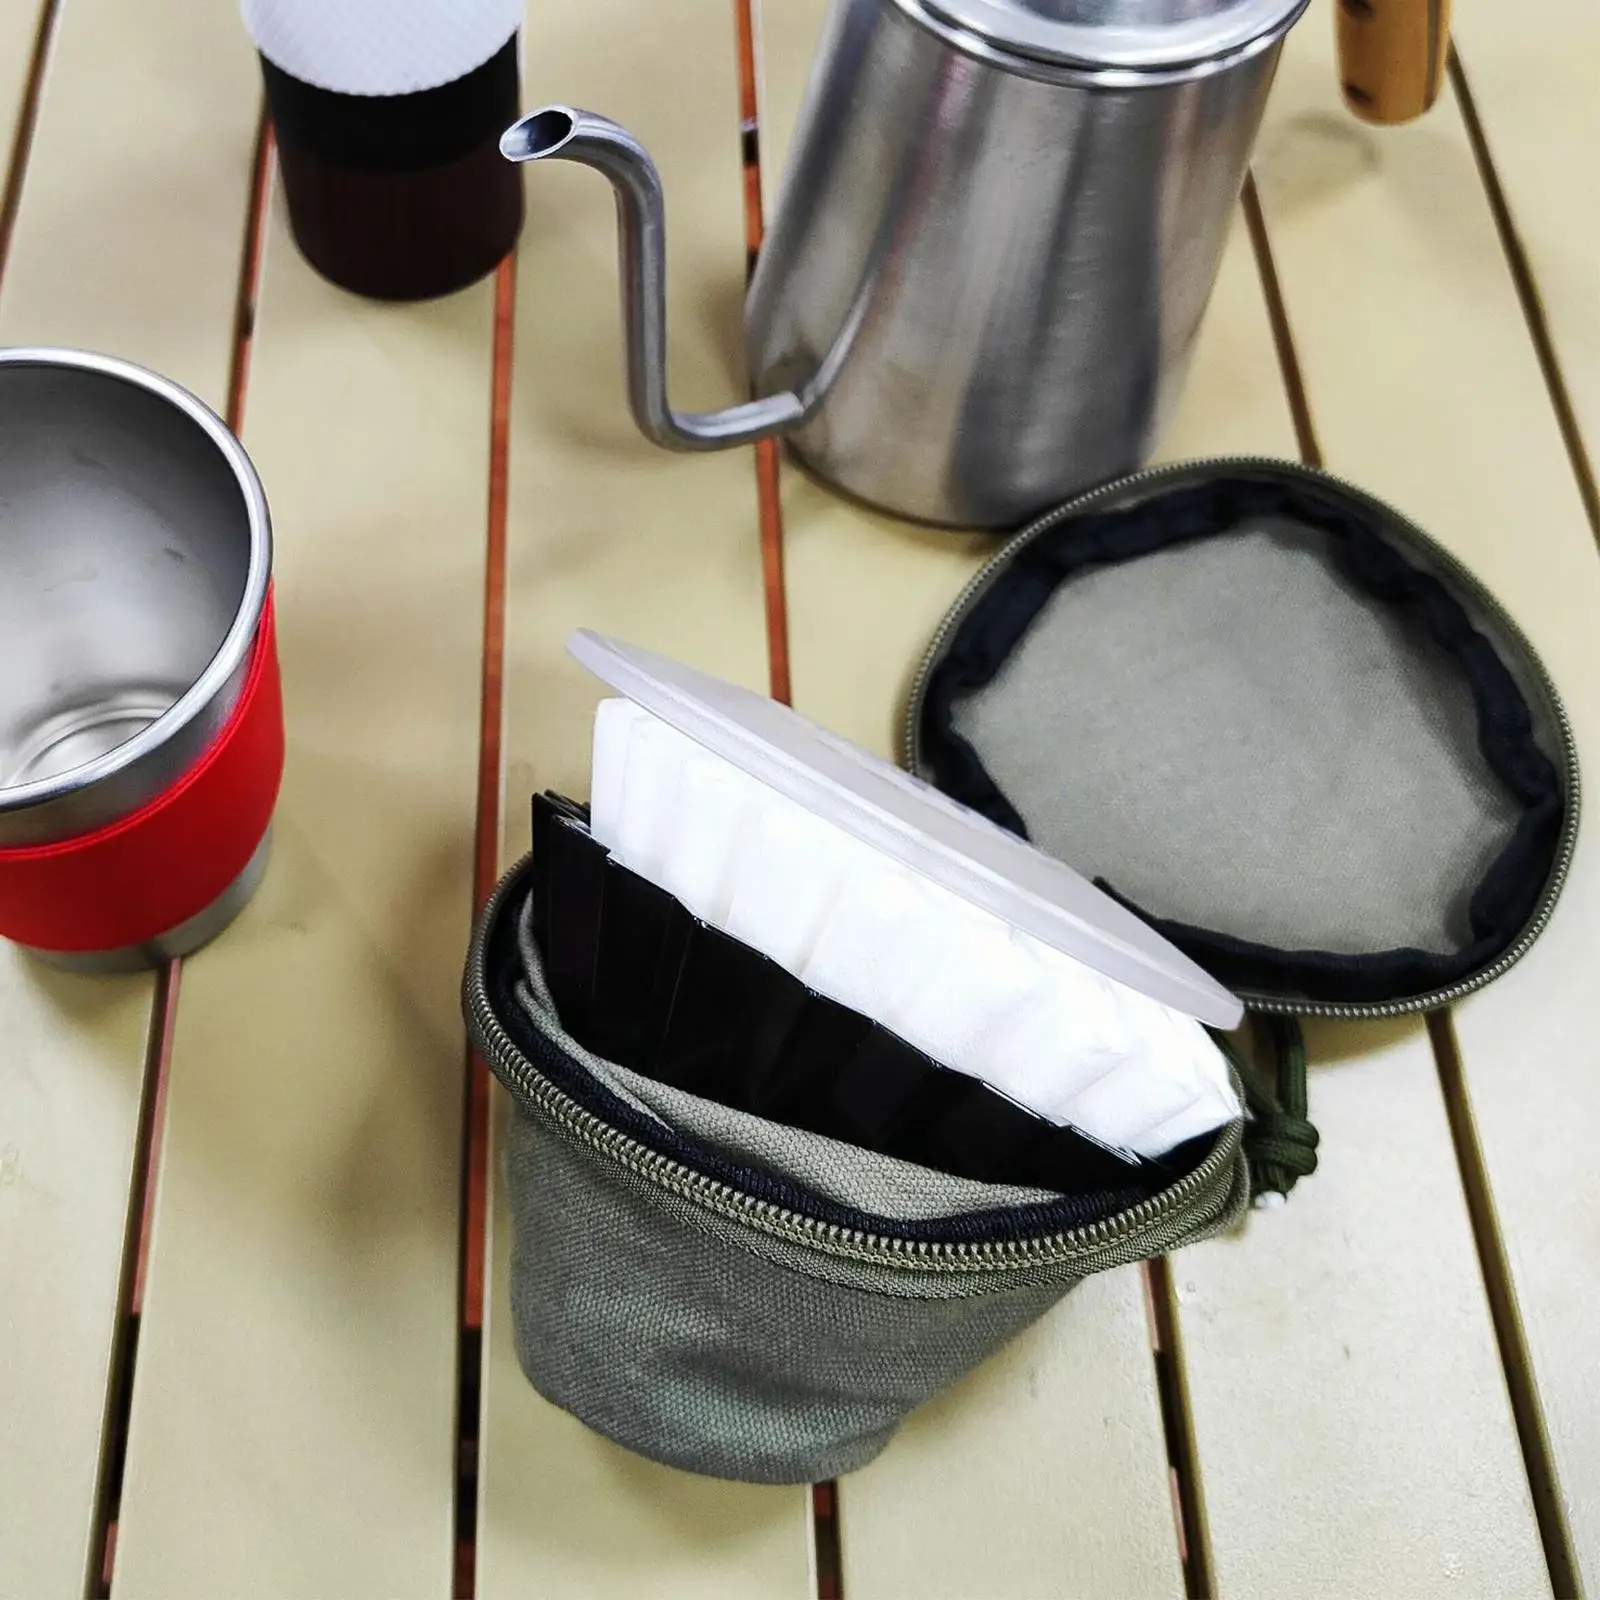 Coffee Filter Holder Lightweight Coffee Filter Paper Storage Case for Hiking